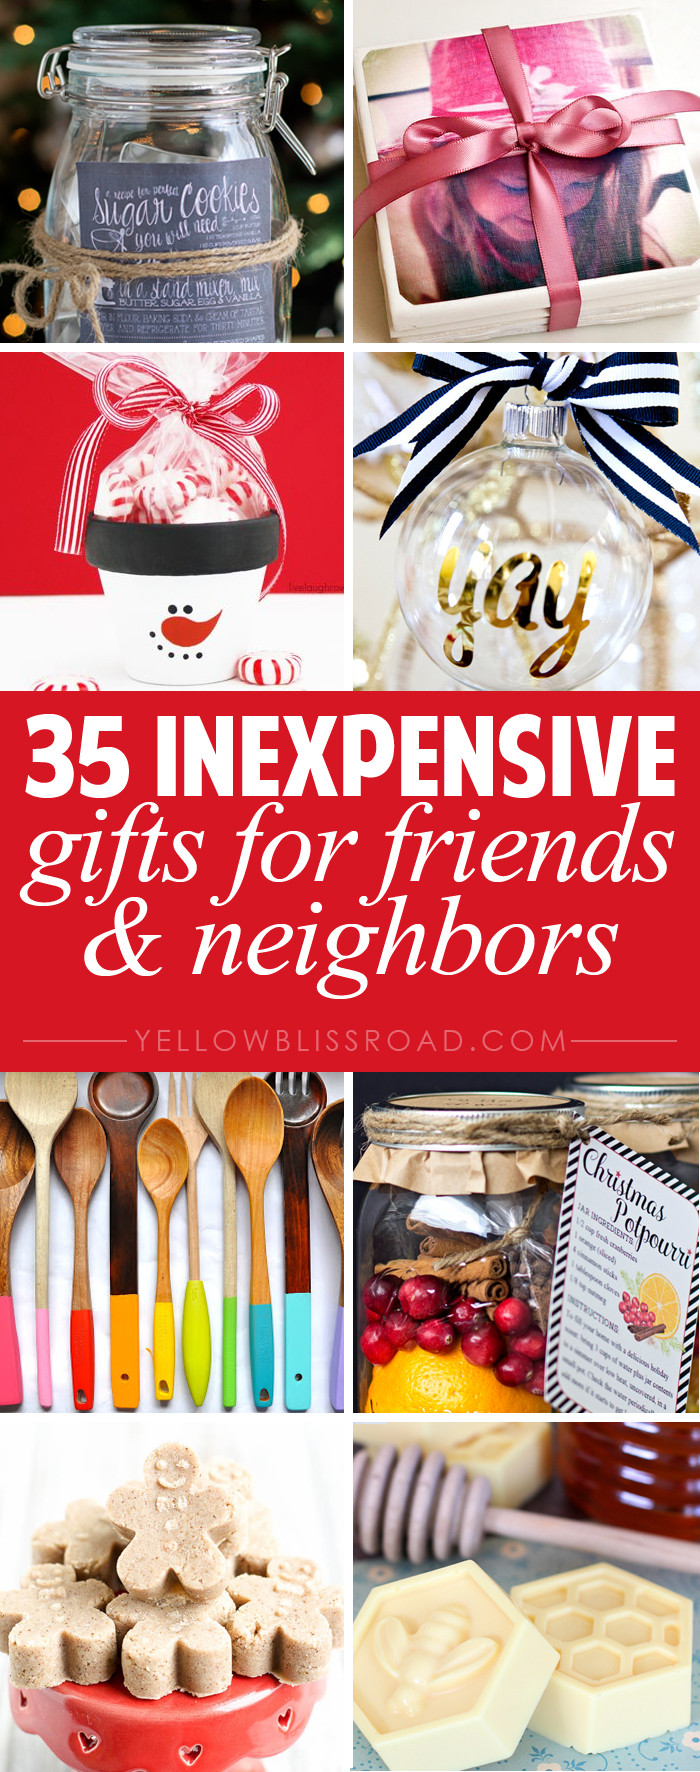 Christmas Gift Ideas For Friends
 35 Gift Ideas for Neighbors and Friends Yellow Bliss Road